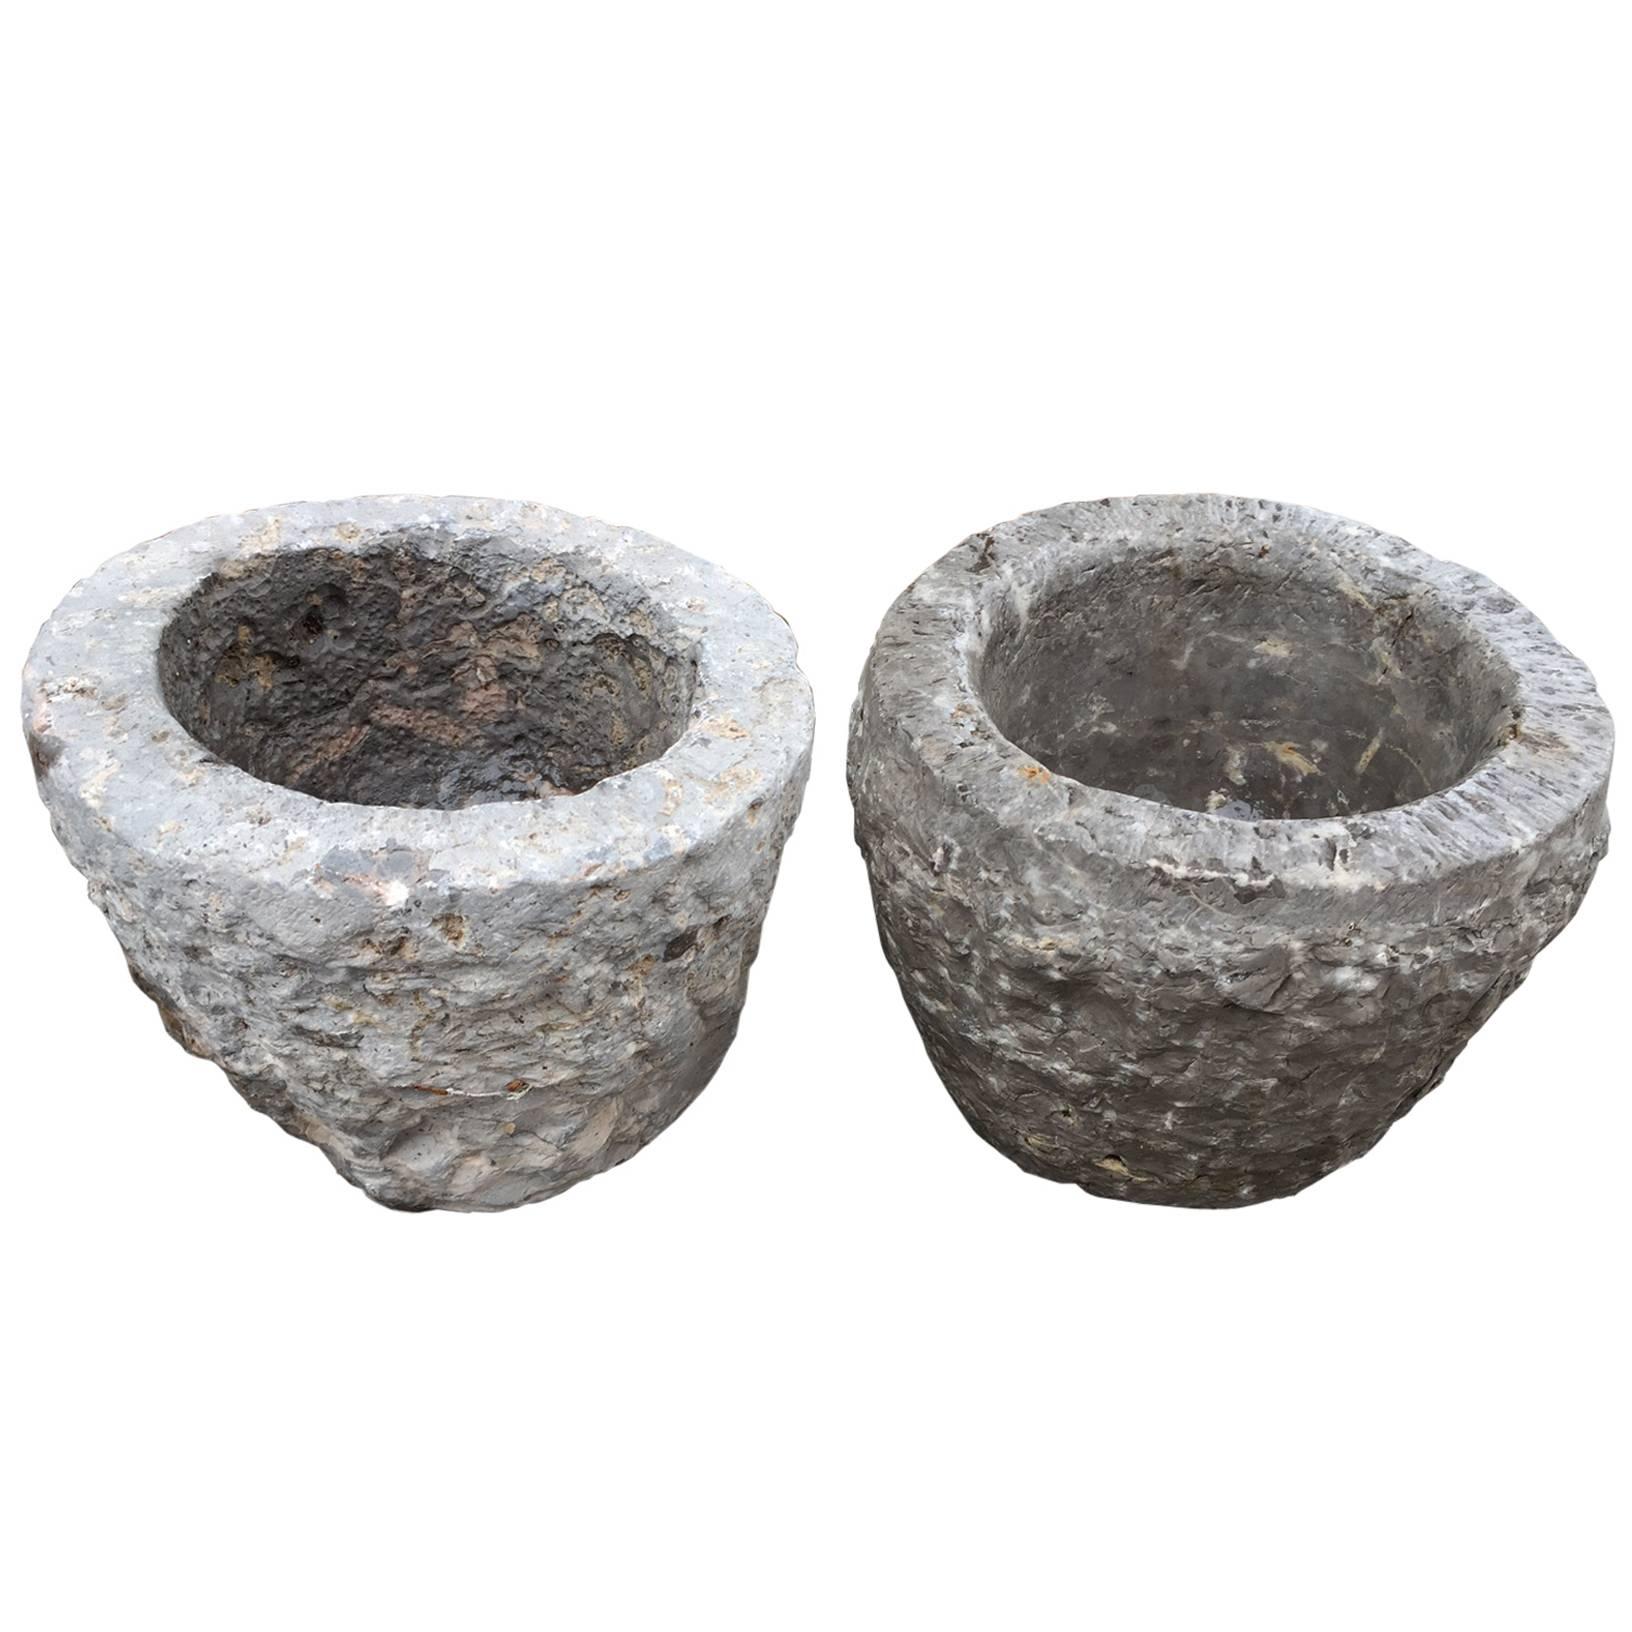 China Antique Stone Garden Cachepots, Perfect for Flowers, Herbs and More 